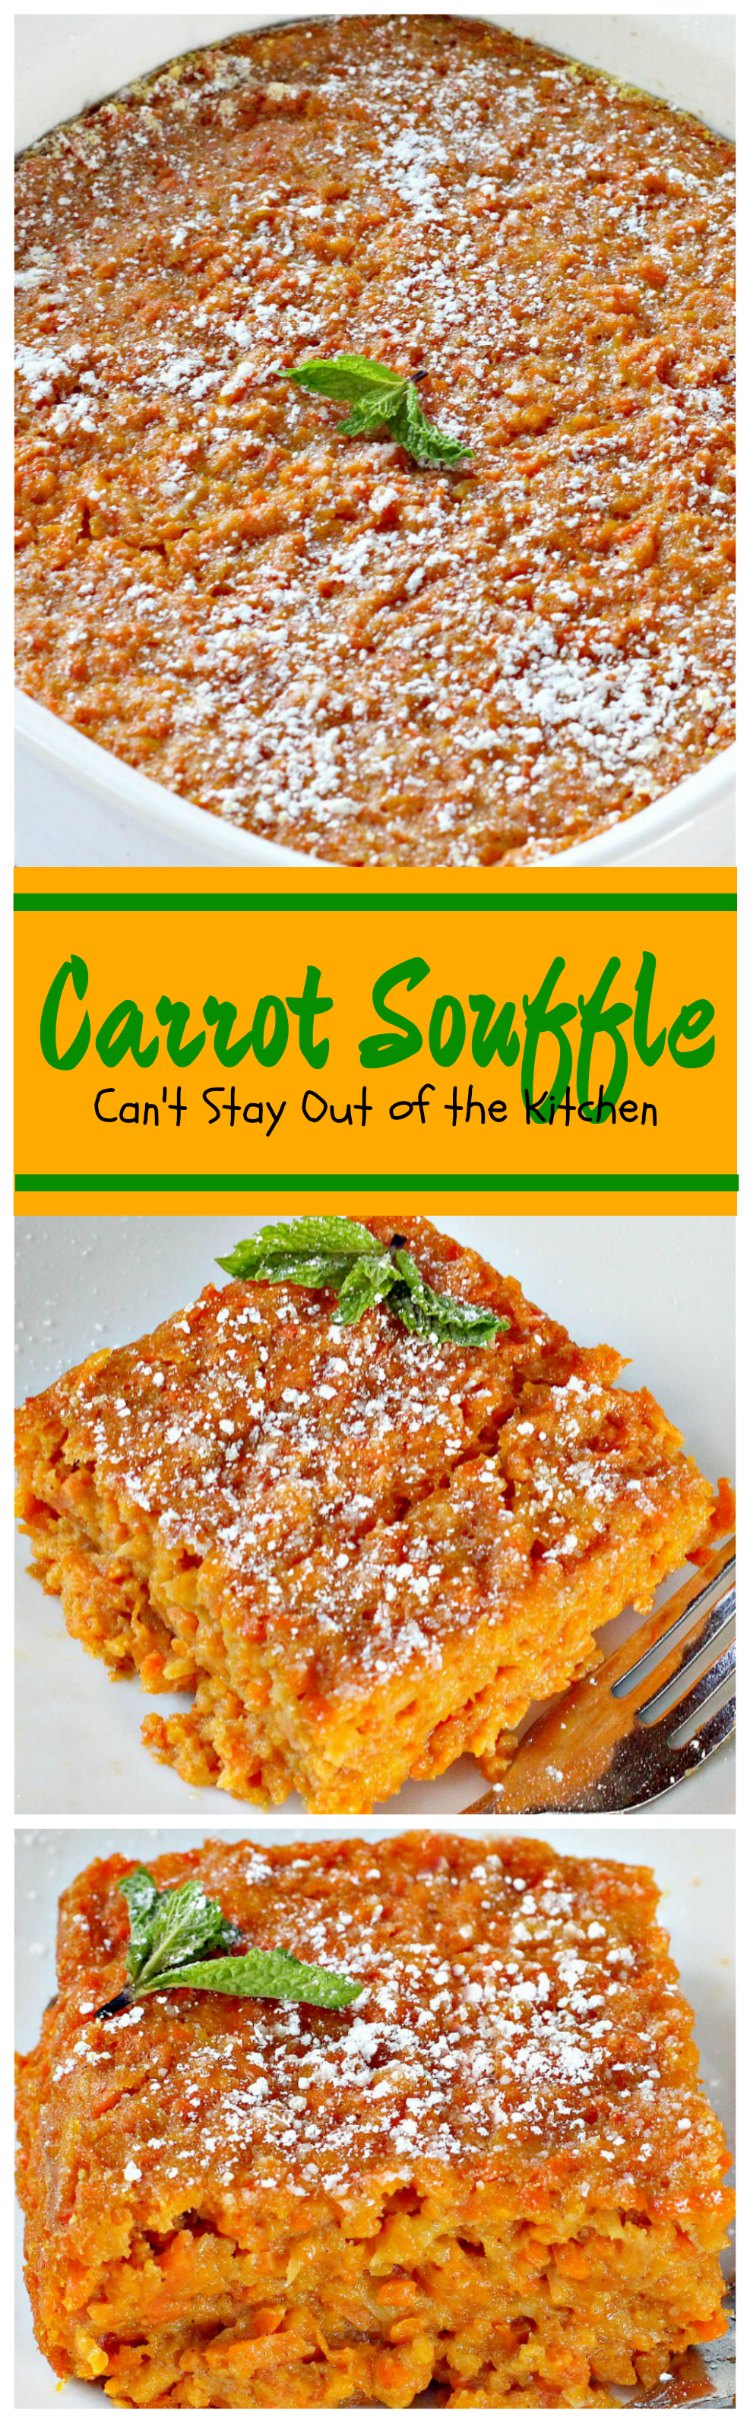 Carrot Souffle | Can't Stay Out of the Kitchen